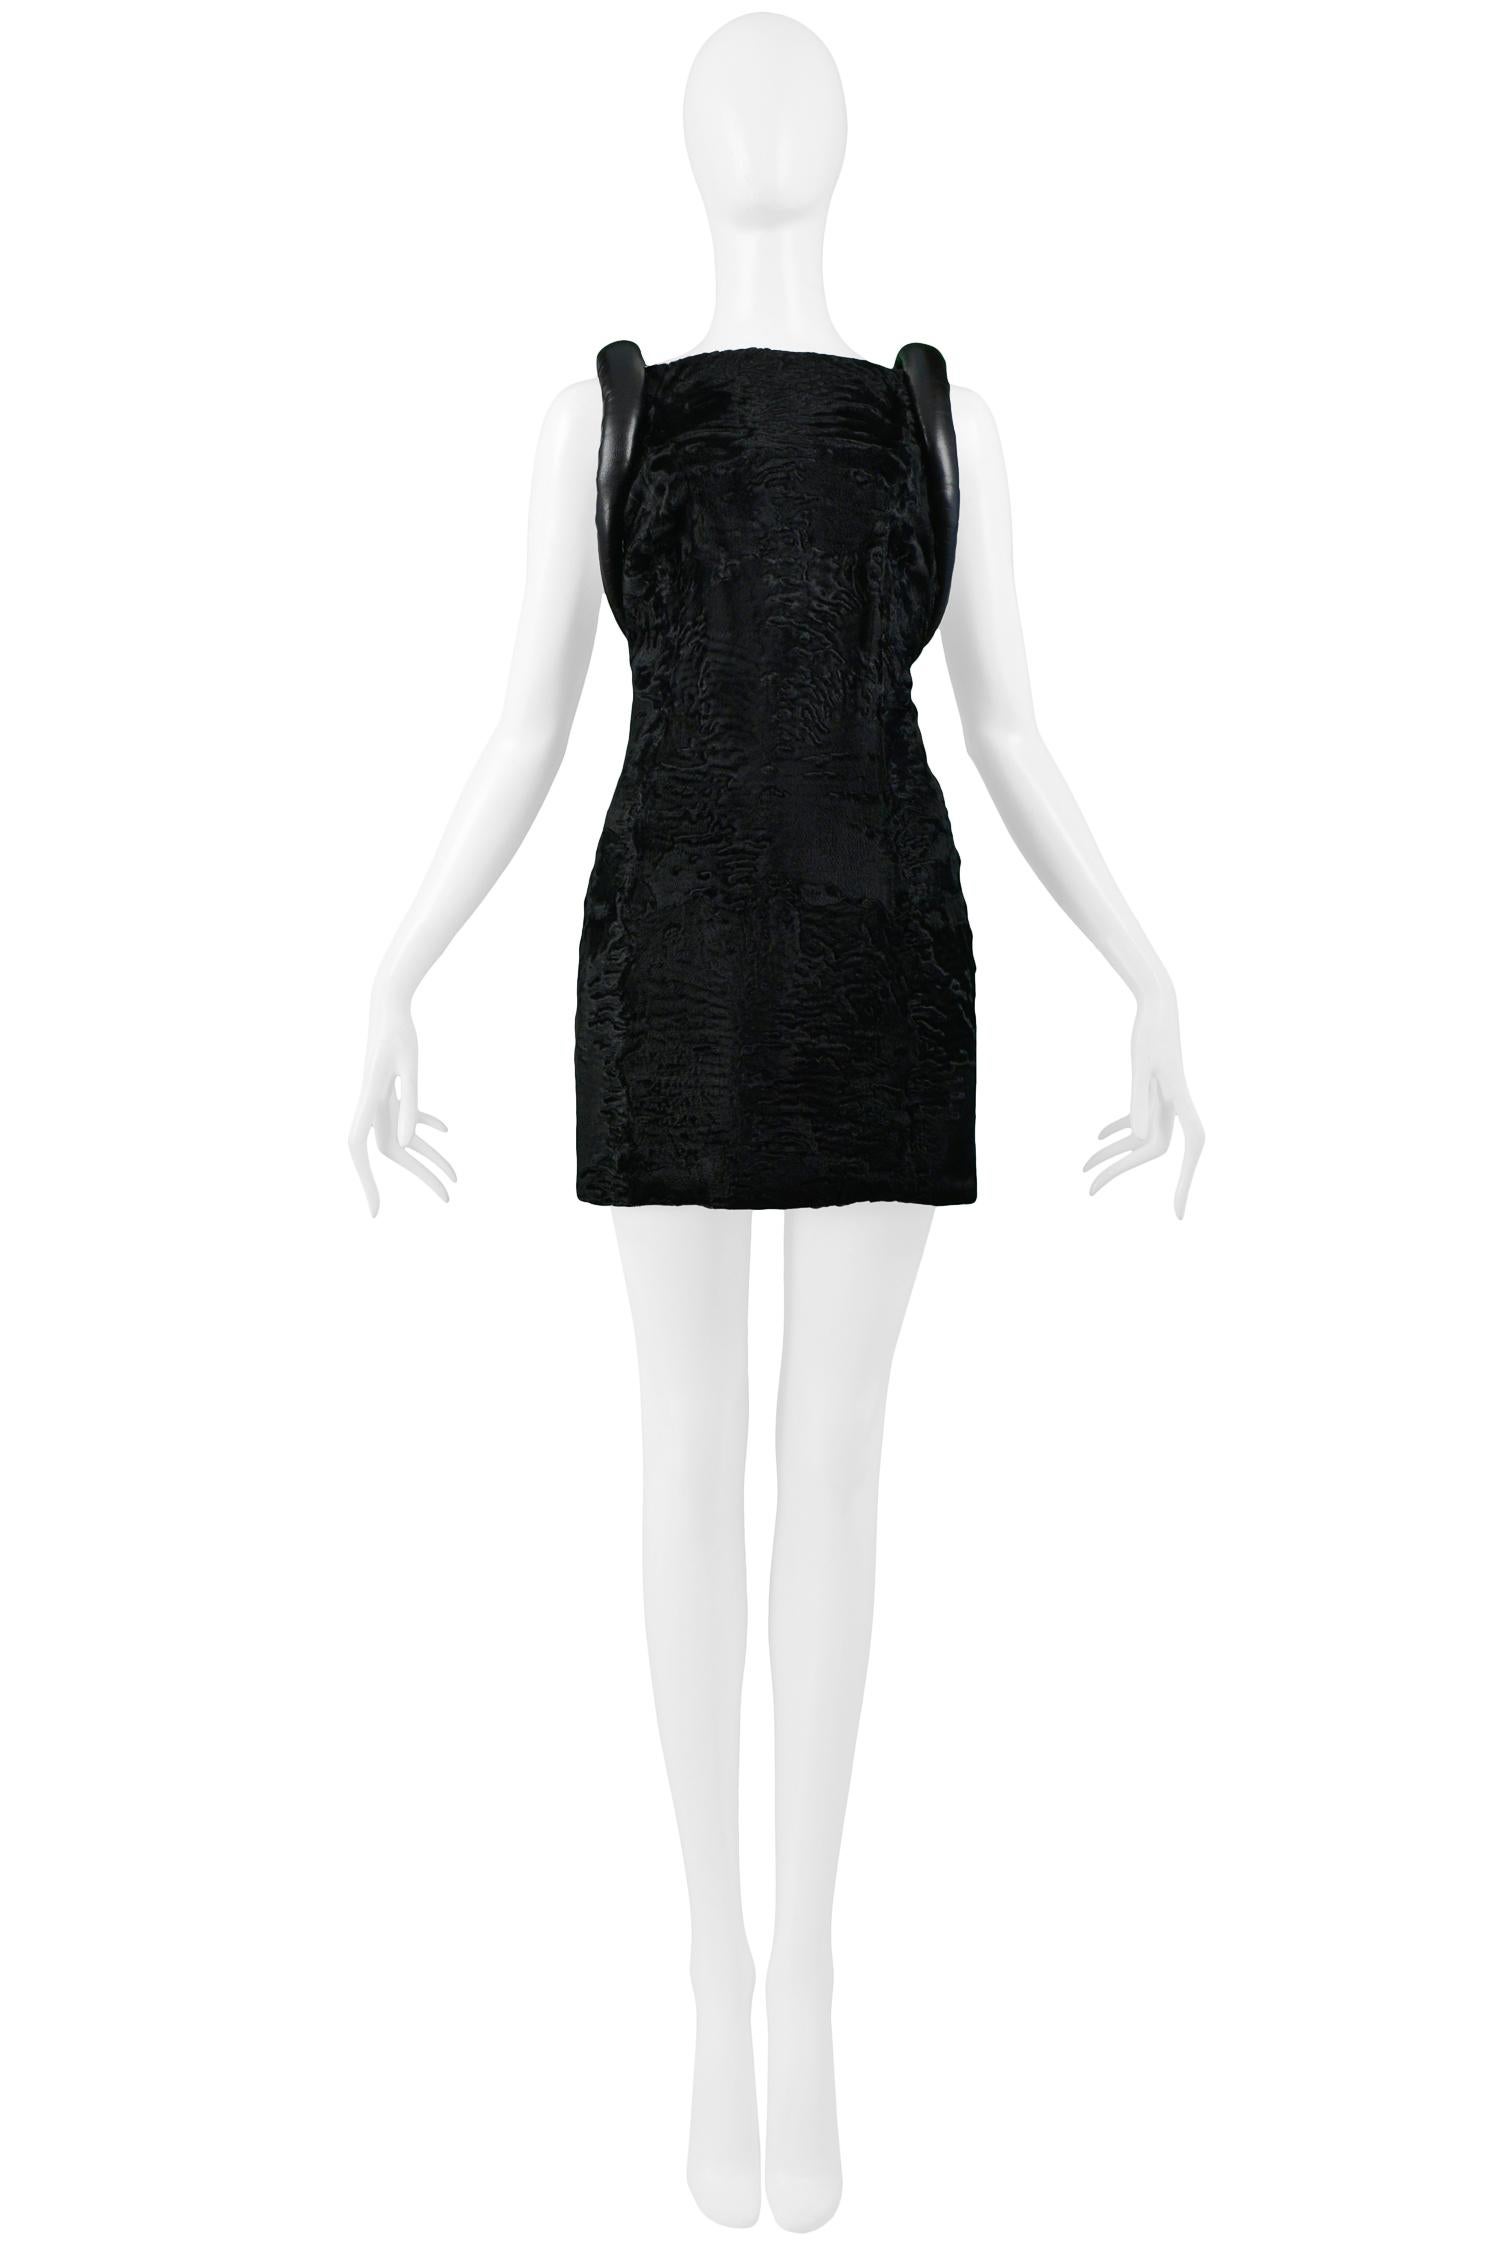 Versace Black Broadtail & Leather Couture Mini Dress 1997 In Excellent Condition In Los Angeles, CA